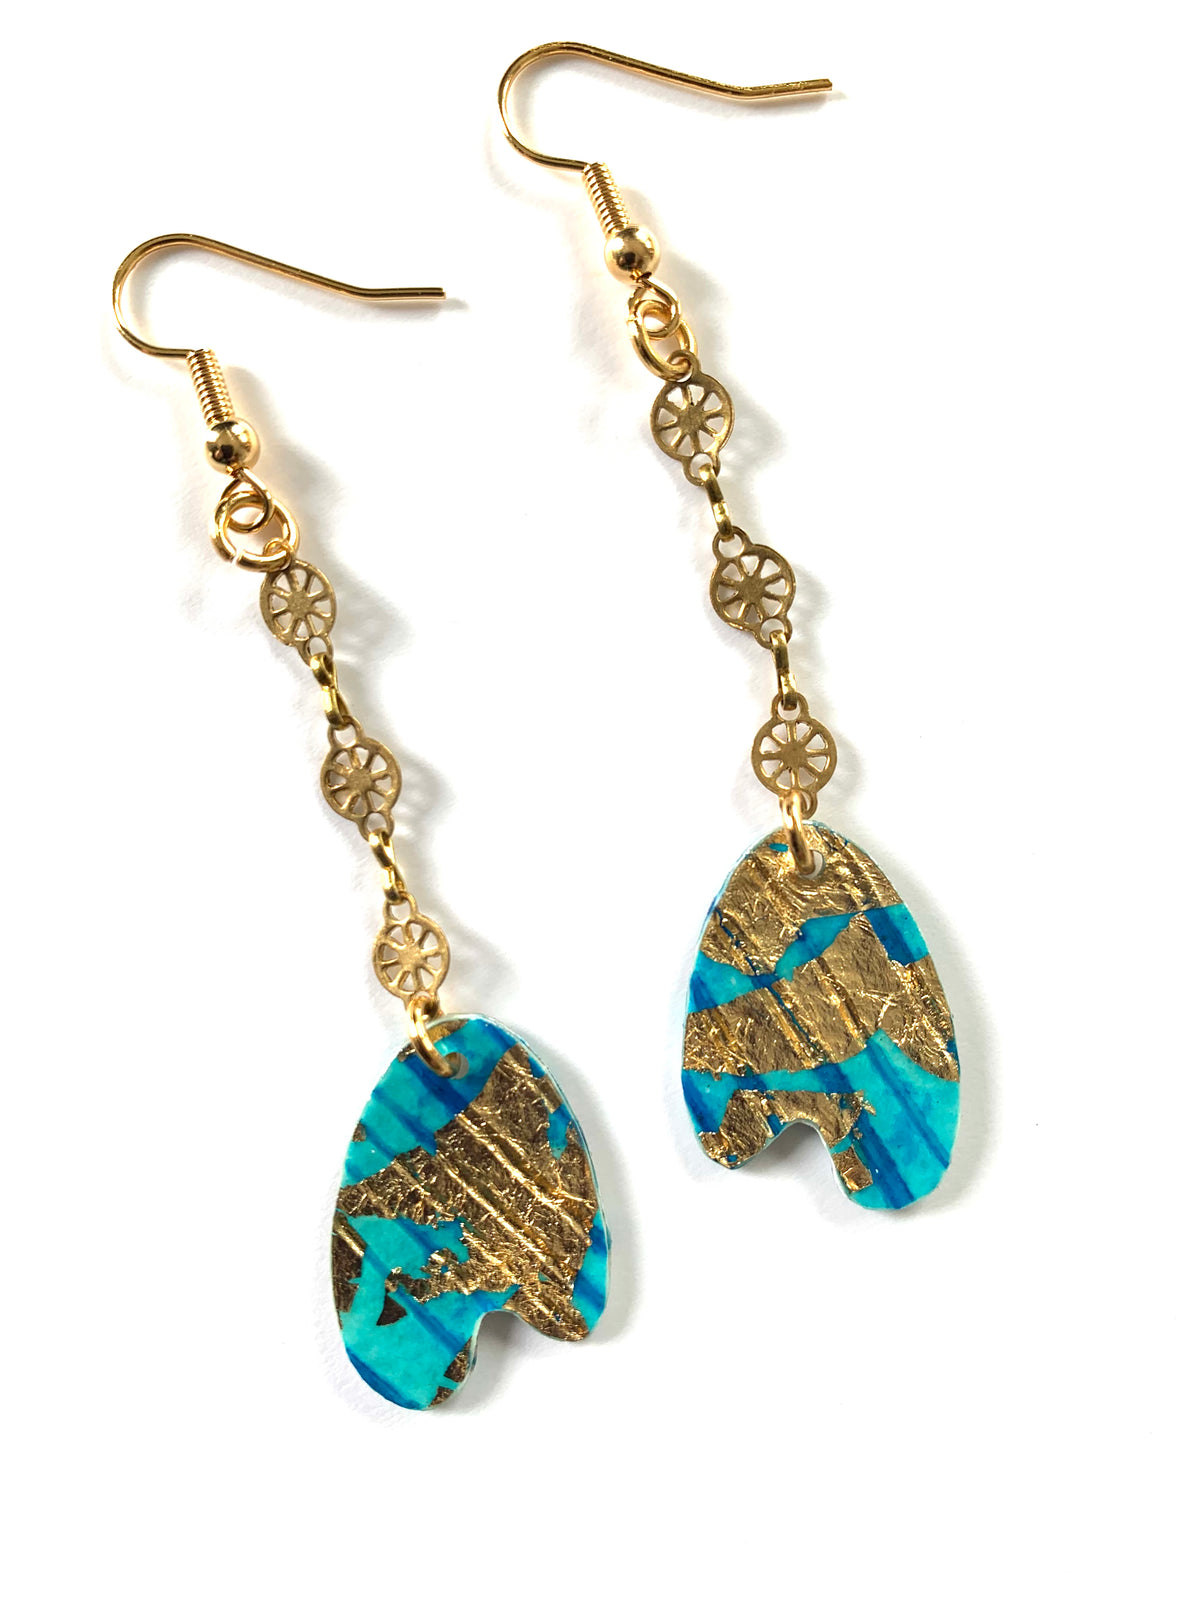 Dola sgraffito textile earrings in turquoise/gold